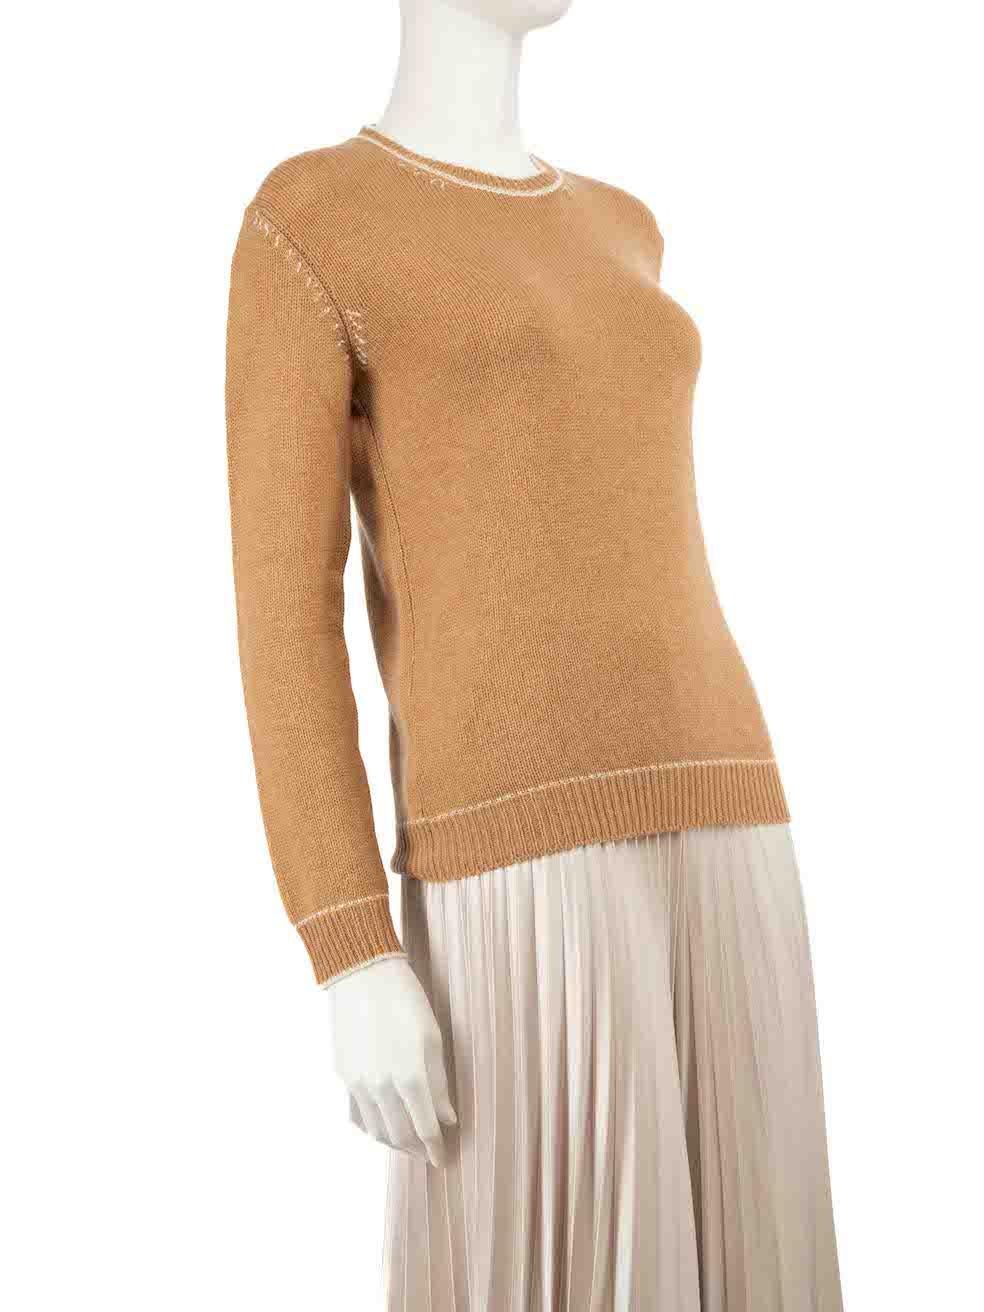 CONDITION is Very good. Hardly any visible wear to jumper is evident on this used Marni designer resale item.
 
 
 
 Details
 
 
 Brown
 
 Cashmere
 
 Knit jumper
 
 Round neck
 
 Long sleeves
 
 Cream contrast trim
 
 
 
 
 
 Made in Italy
 
 
 
